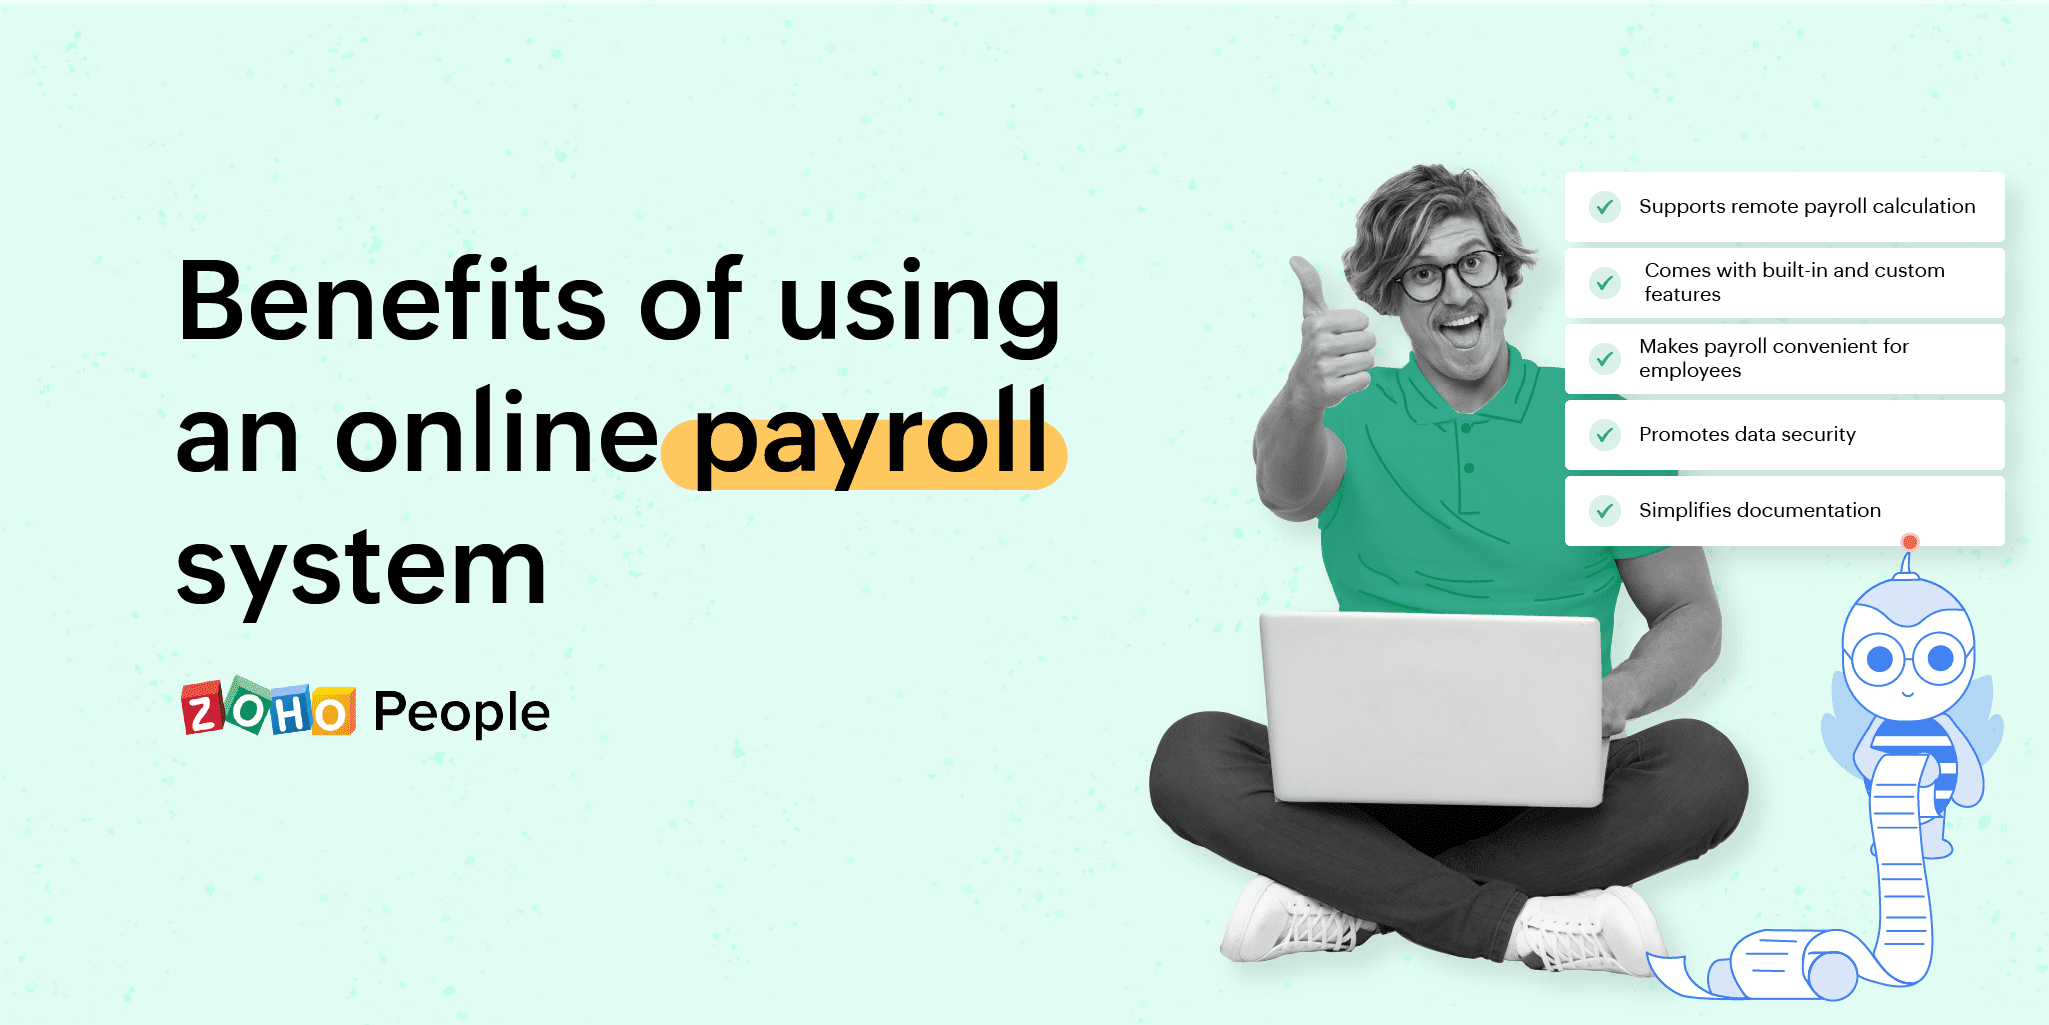 Benefits of using online payroll system